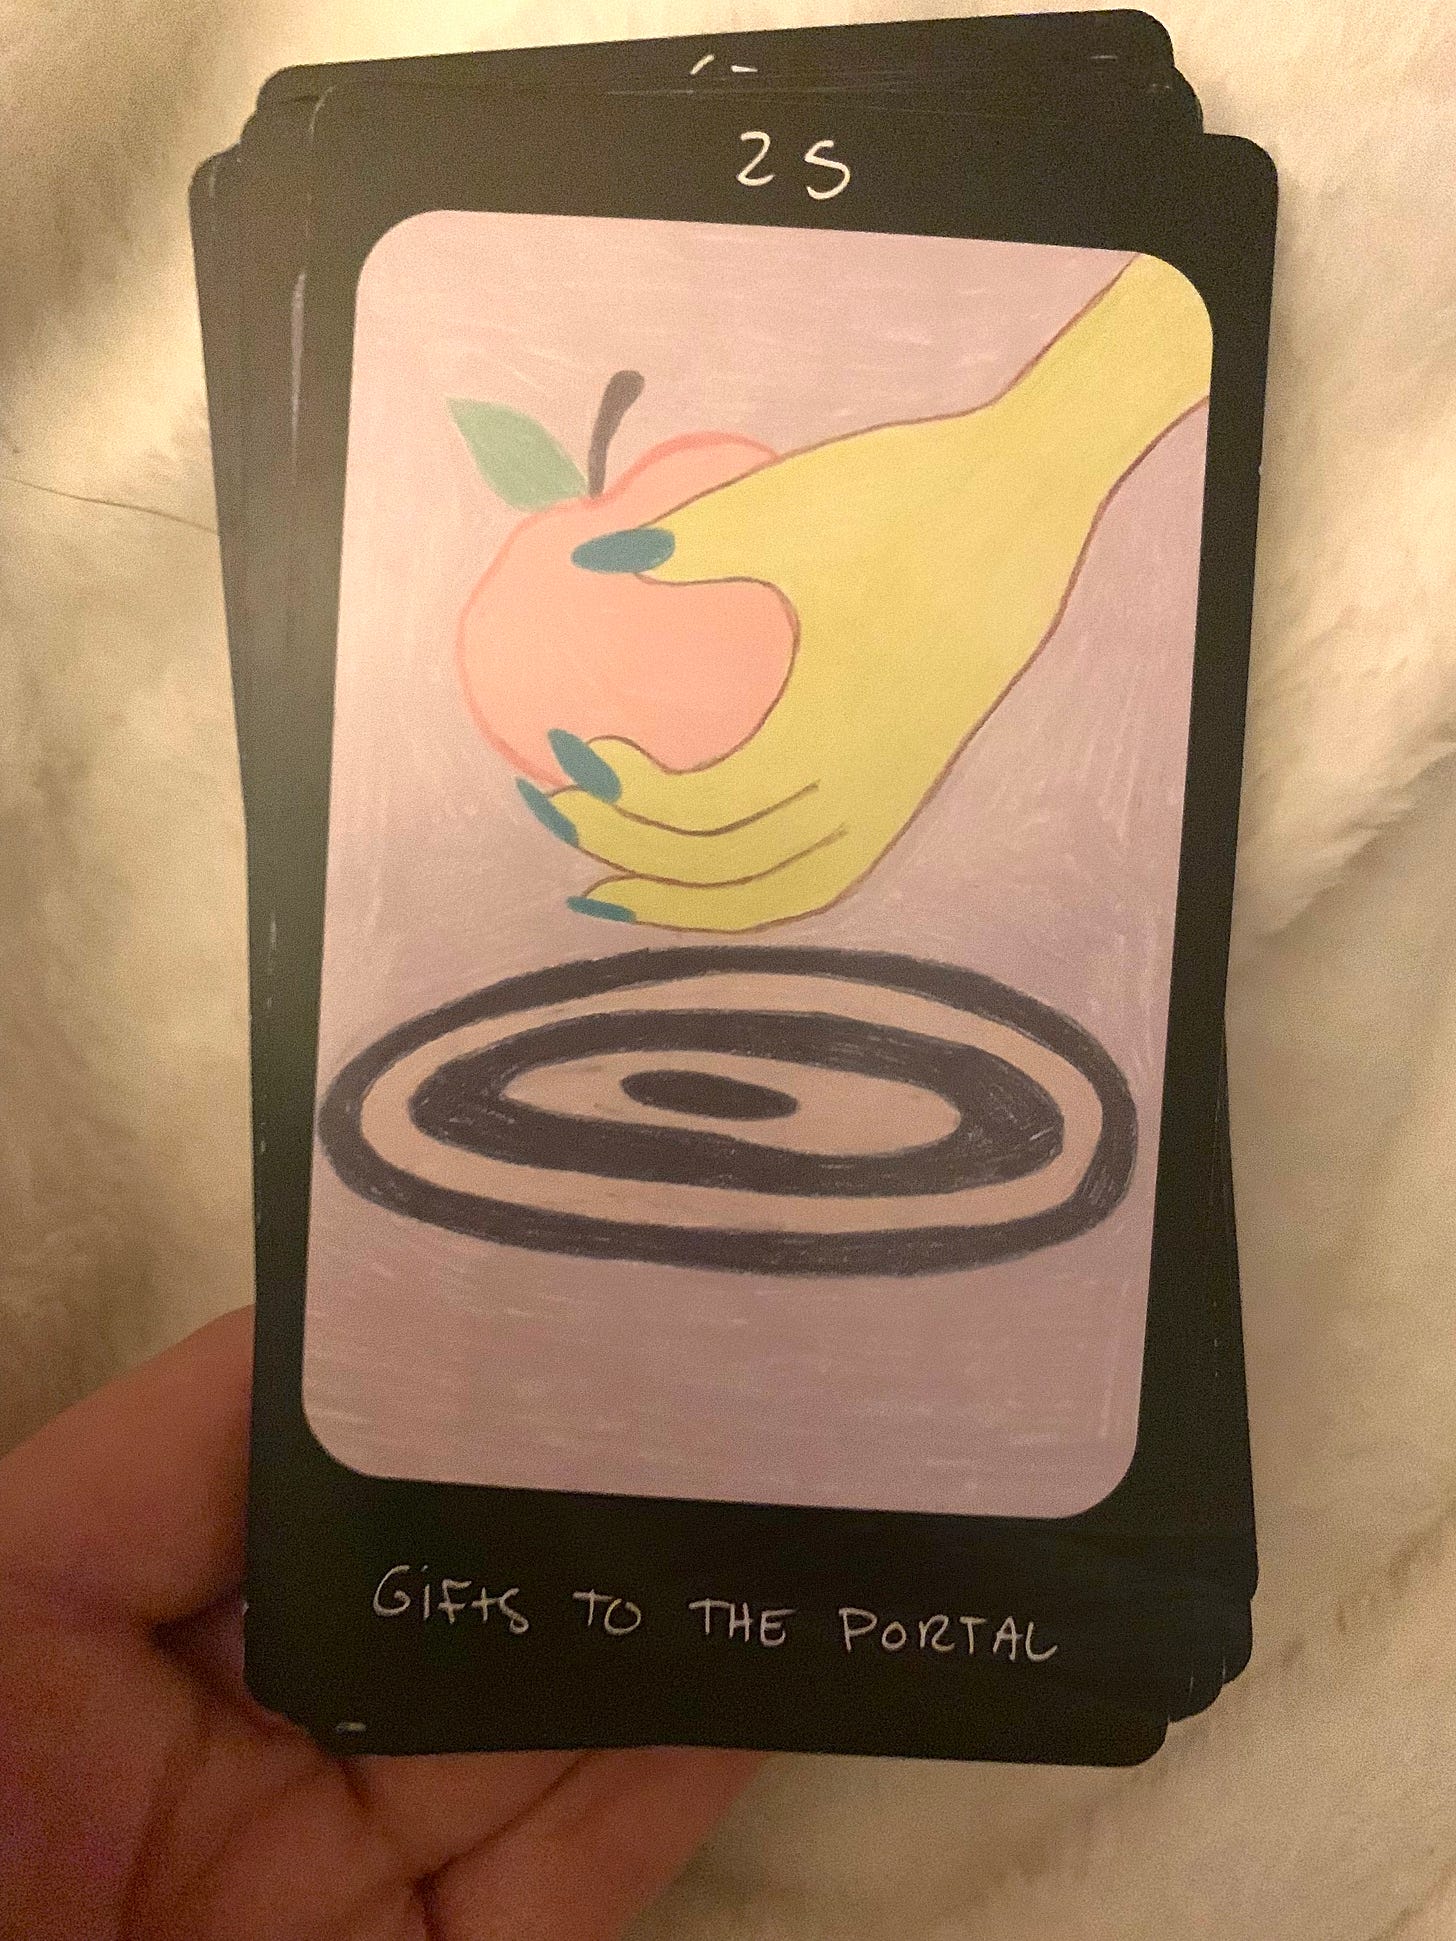 mira's left hand holds a stack of oracle cards over a fuzzy white blanket. the top card reads, "25" on the top and "GIFTS TO THE PORTAL" on the bottom. the card has a black border, a lavender background, and depicts an image of a hand offering an apple to a portal.